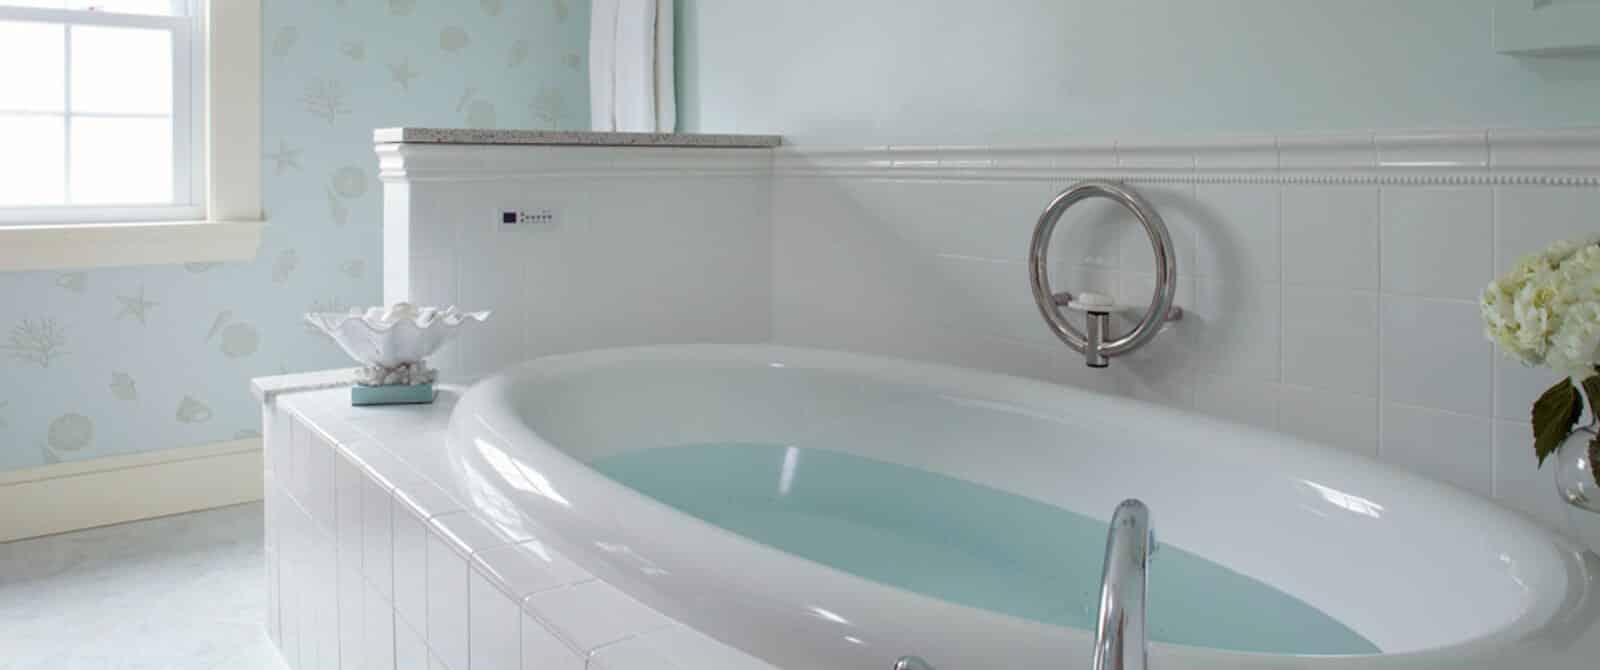 Large oval soaker tub filled with water in bathroom with white tile bright window